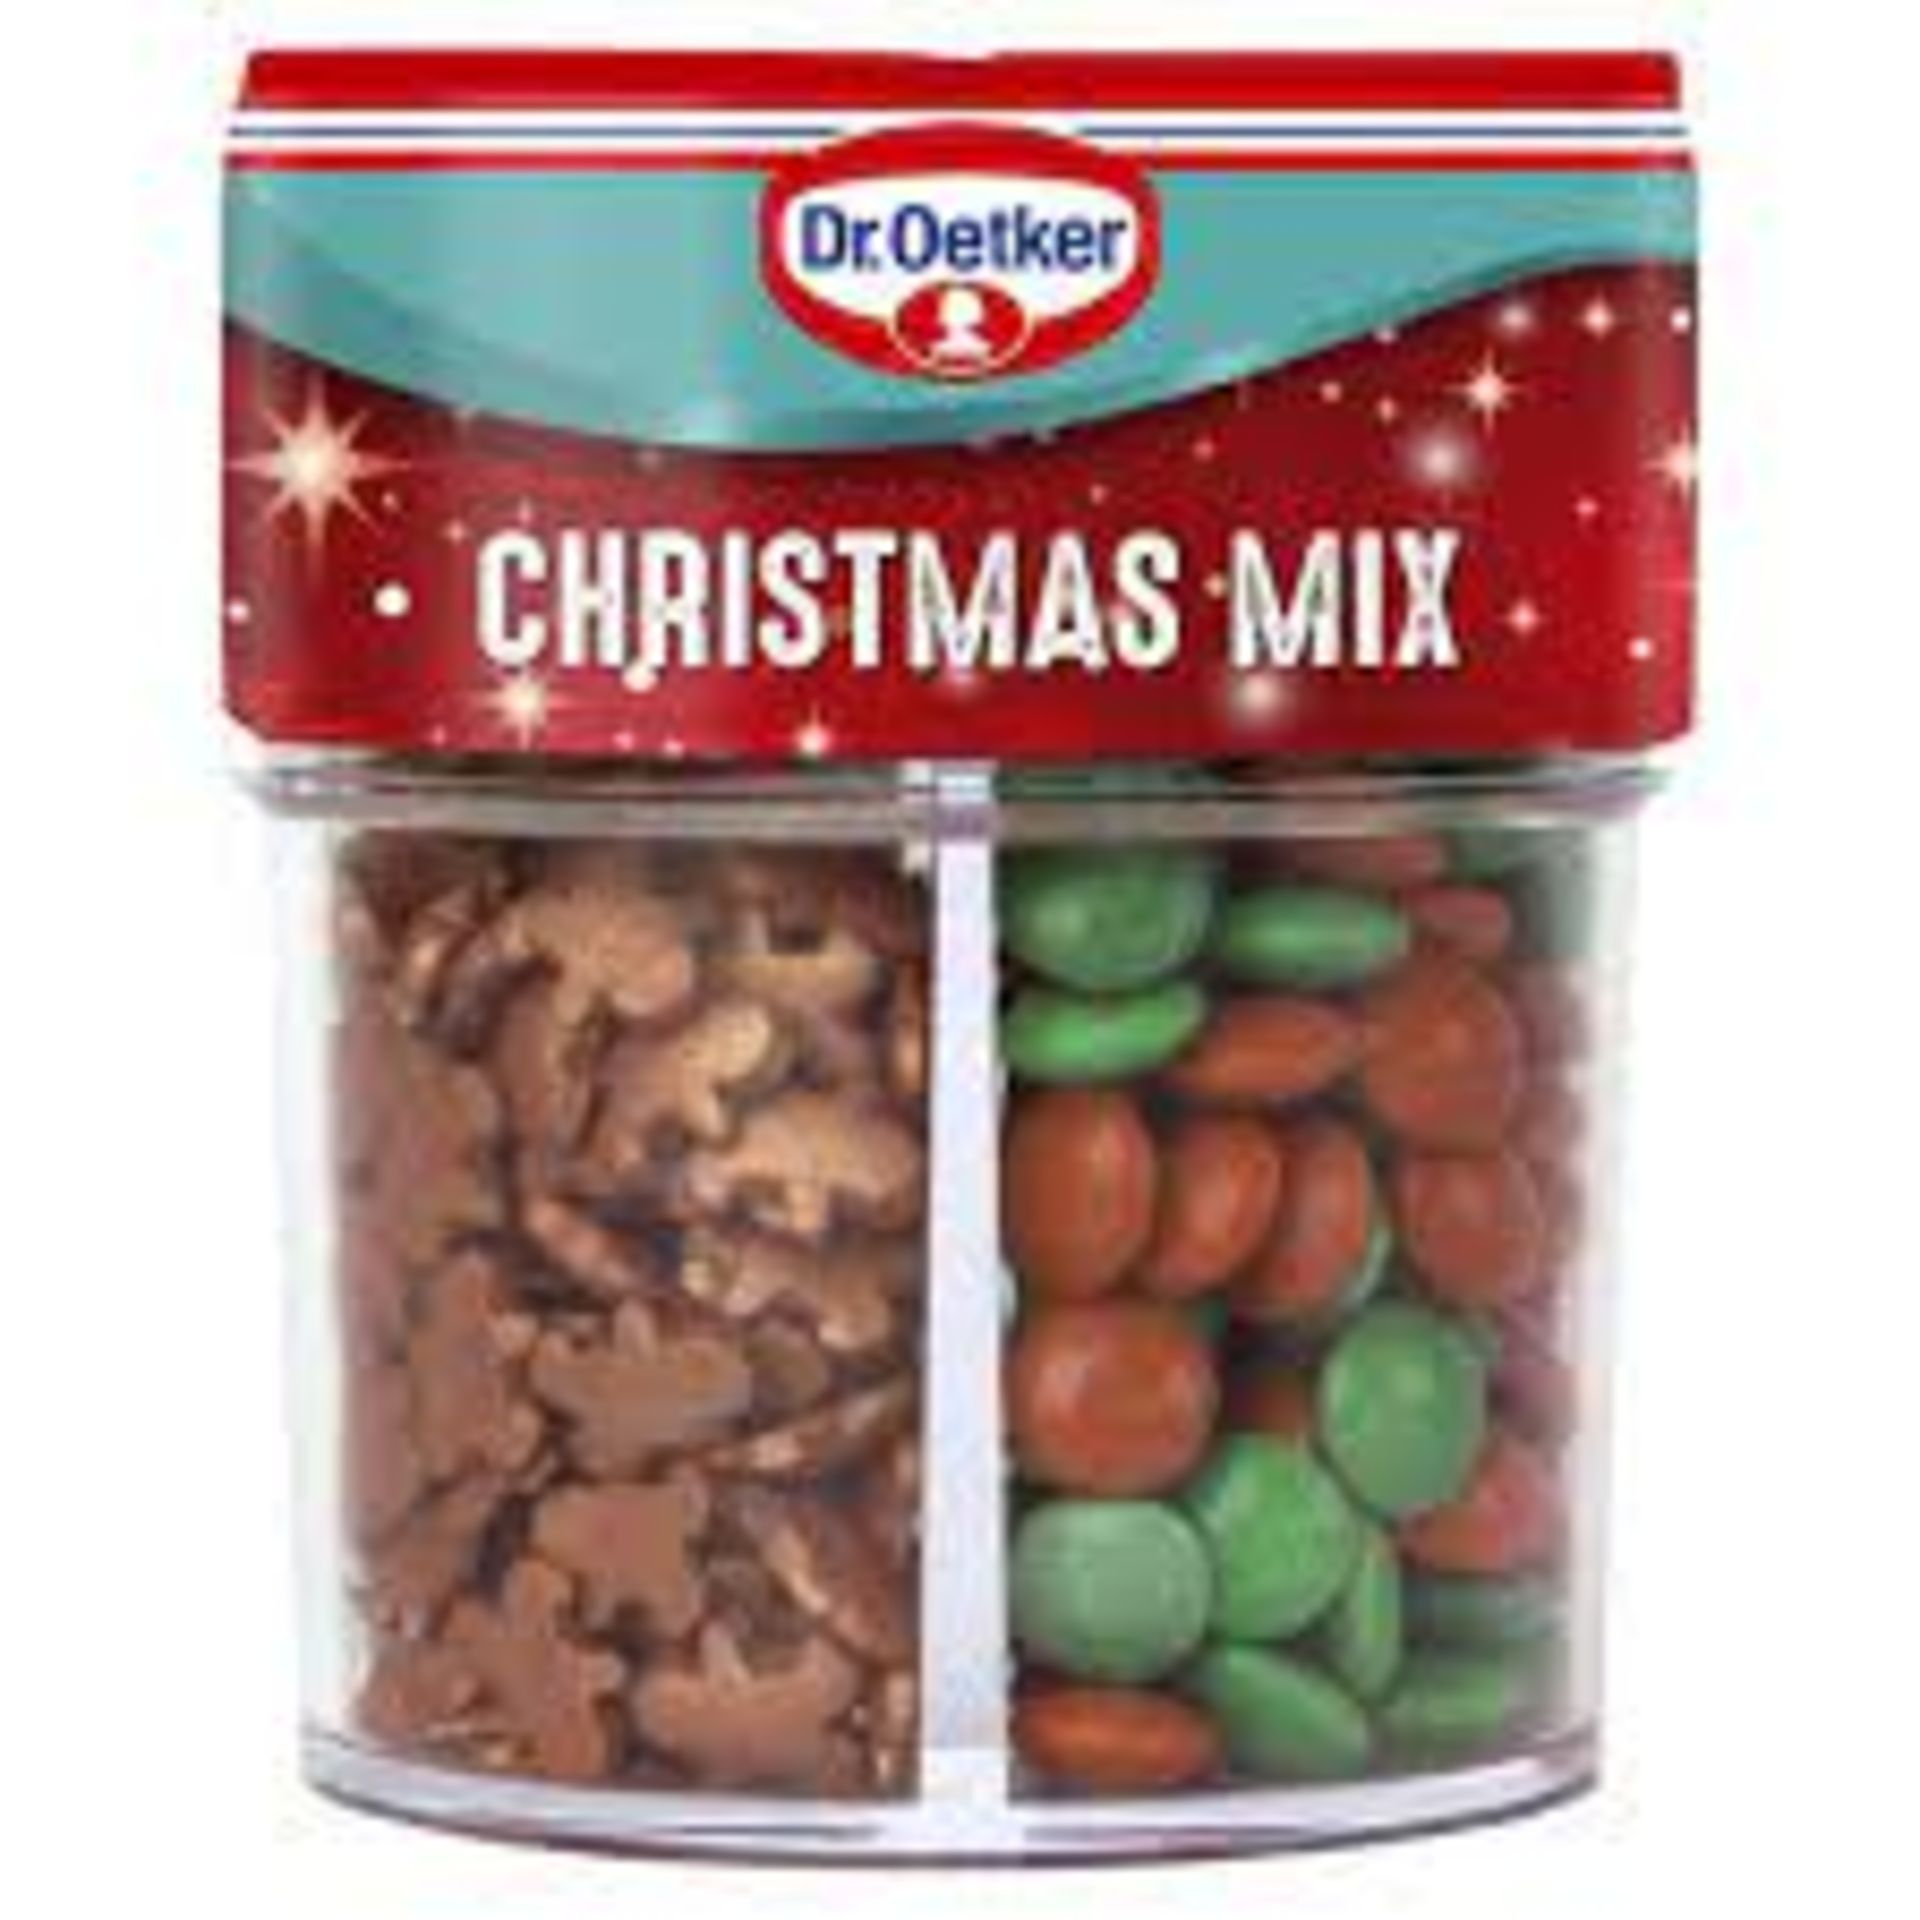 RRP £766 (Approx Count 116) (F20) 20 x Dr. Oetker Christmas Sprinkles Mix, 4 x 76g, Red 10 x